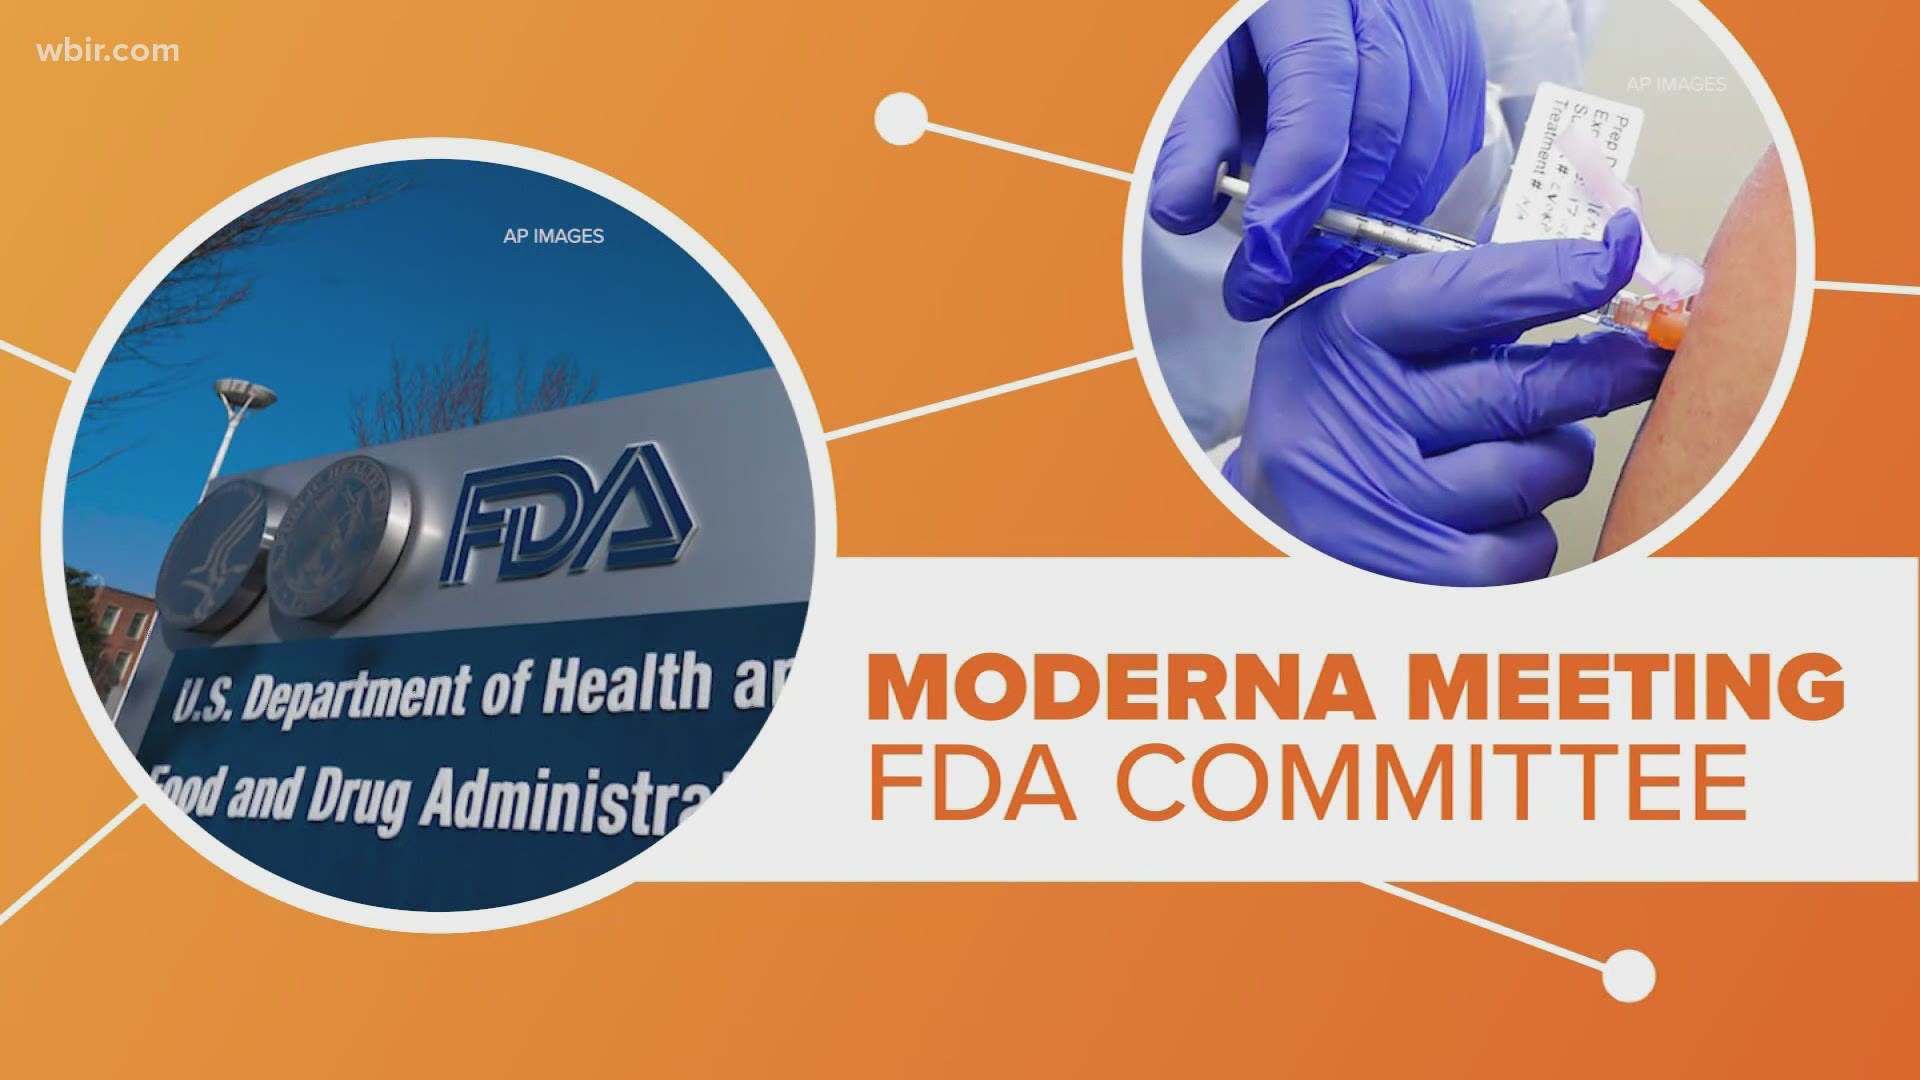 An FDA vaccine advisory committee is meeting today to decide whether to recommend authorizing the Moderna coronavirus vaccine.